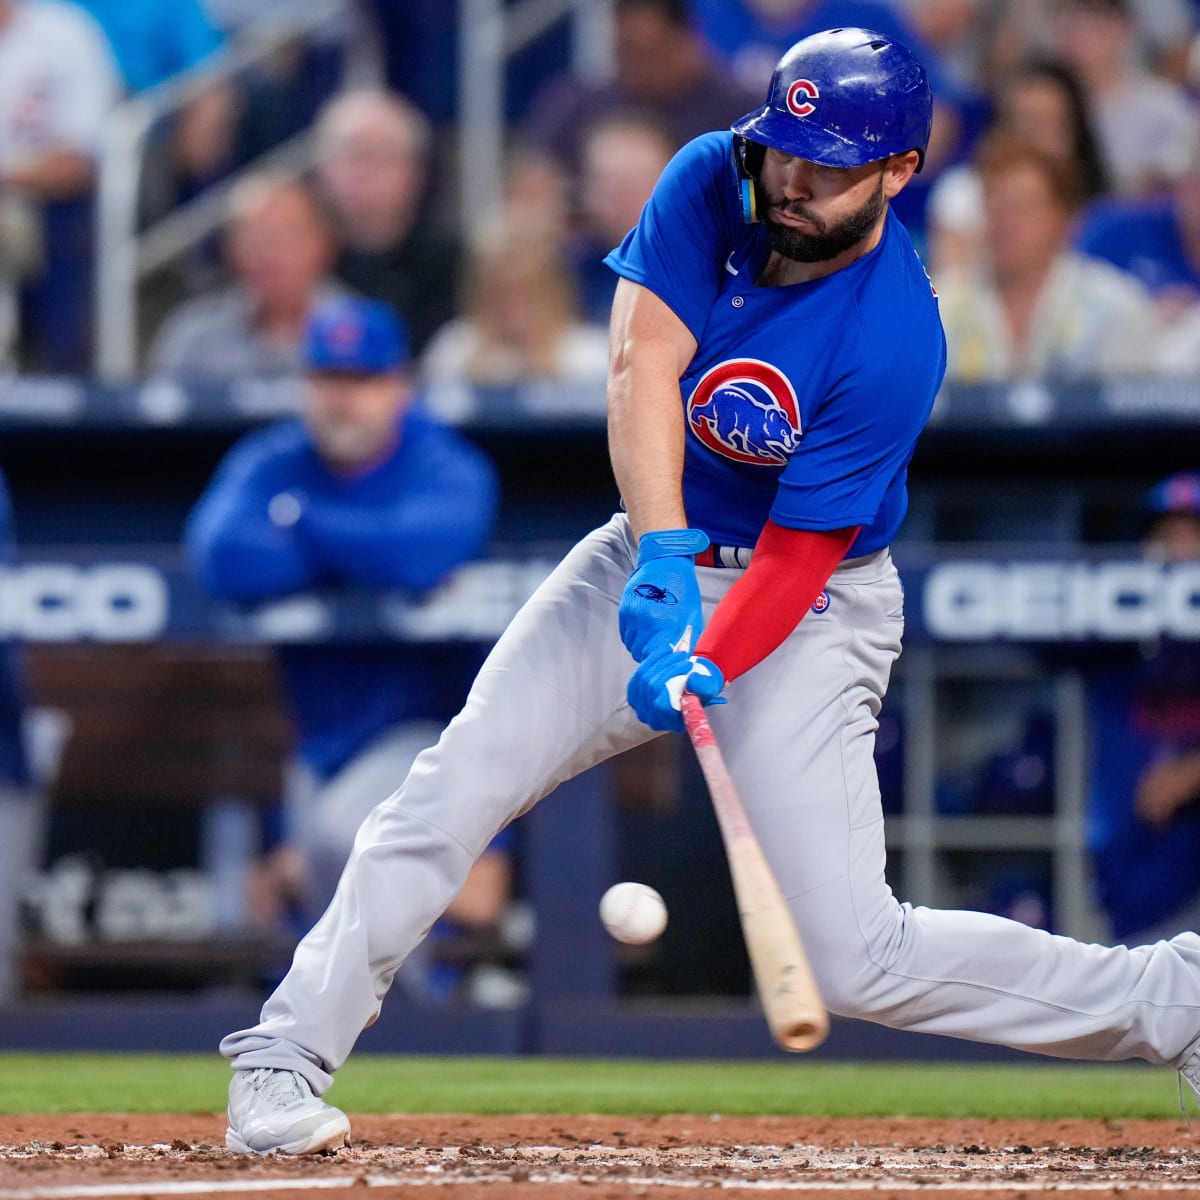 Should Chicago Cubs Continue to Roster Eric Hosmer Over Top